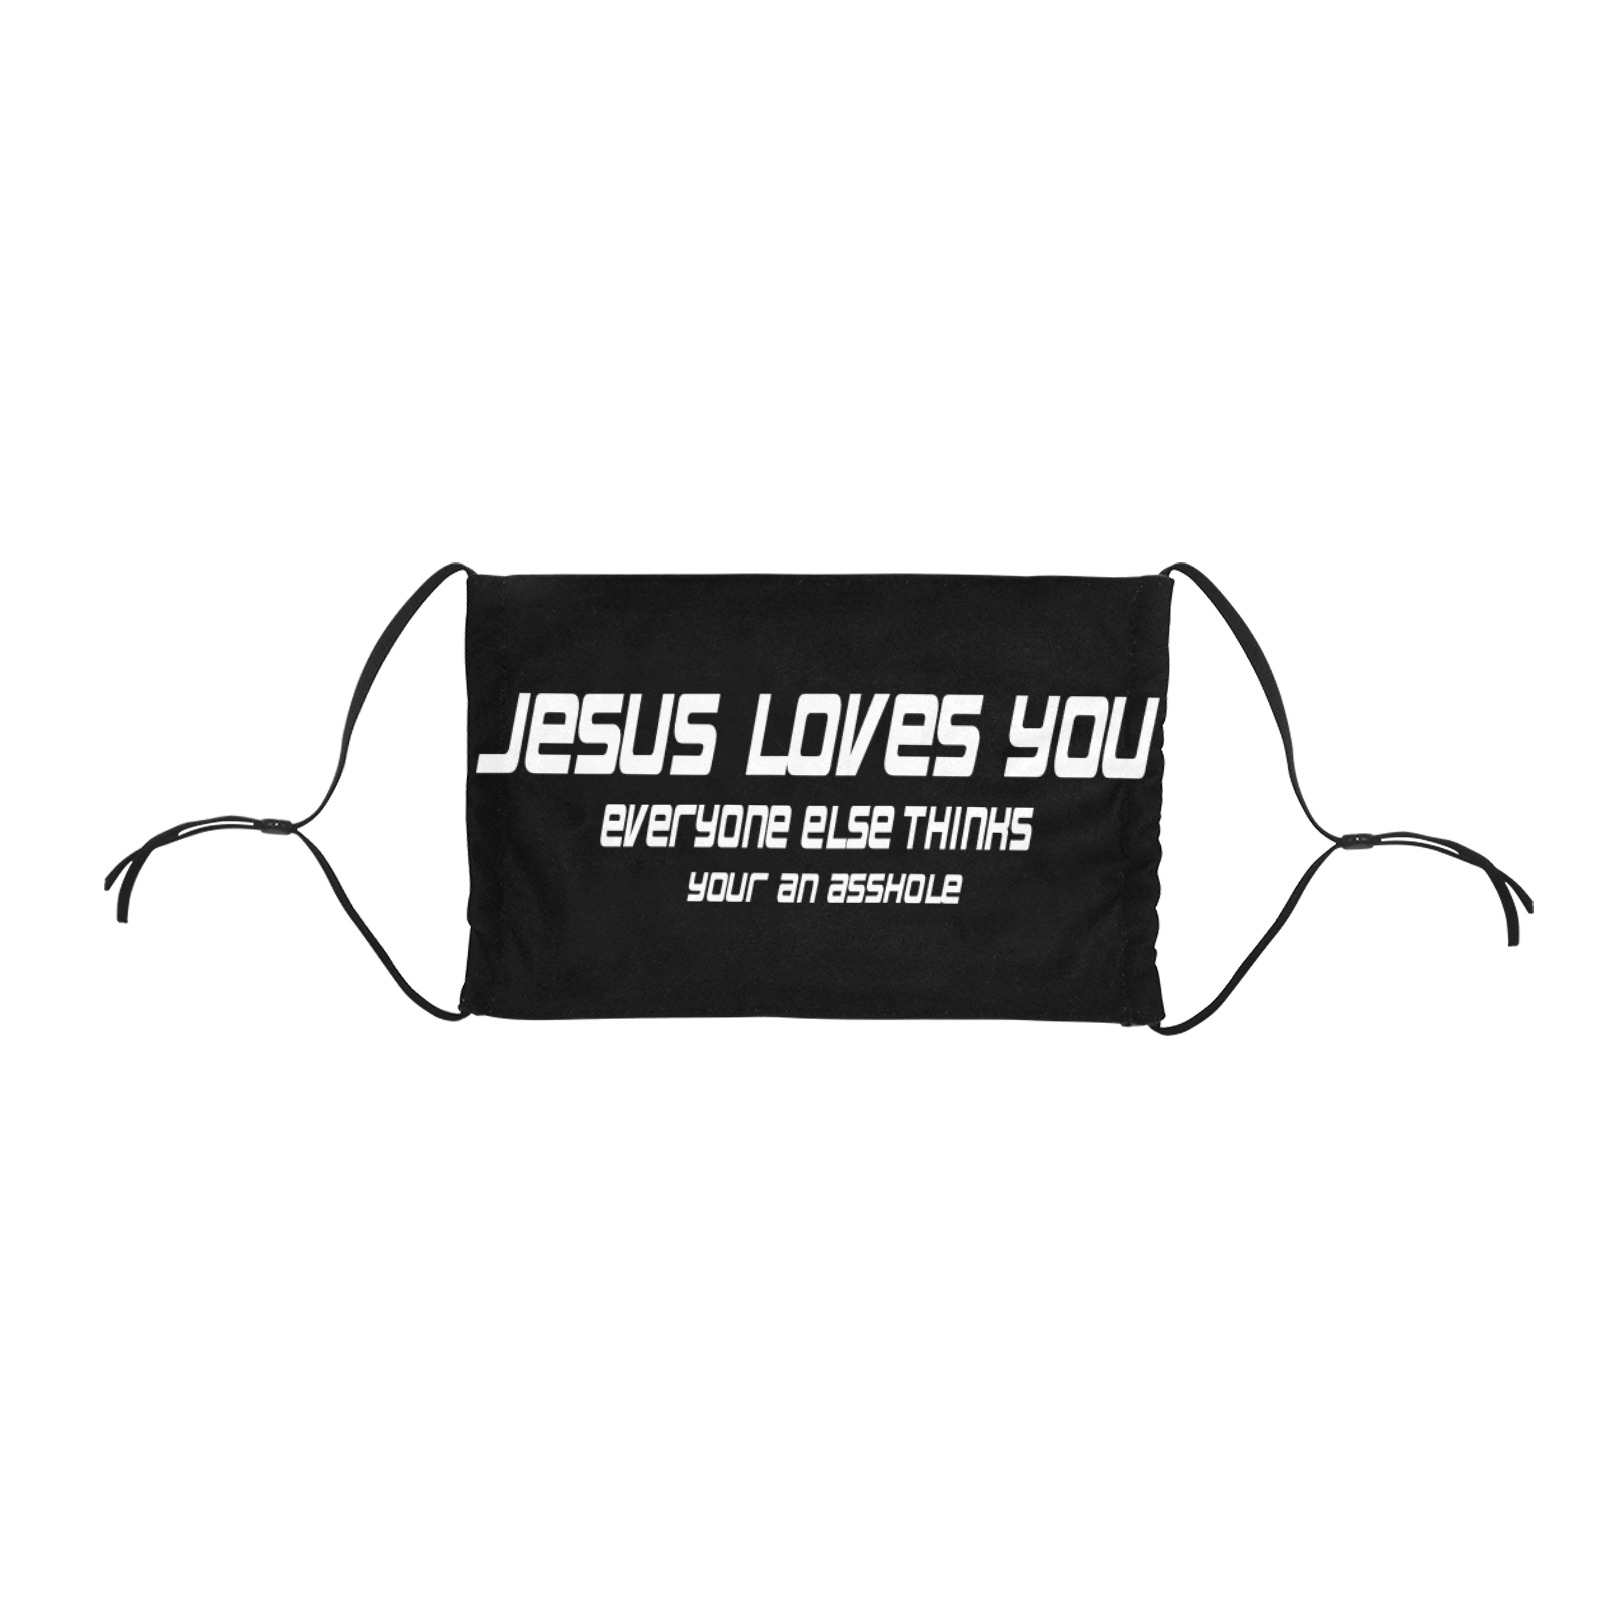 Jesus loves you 1 Flat Mouth Mask with Drawstring